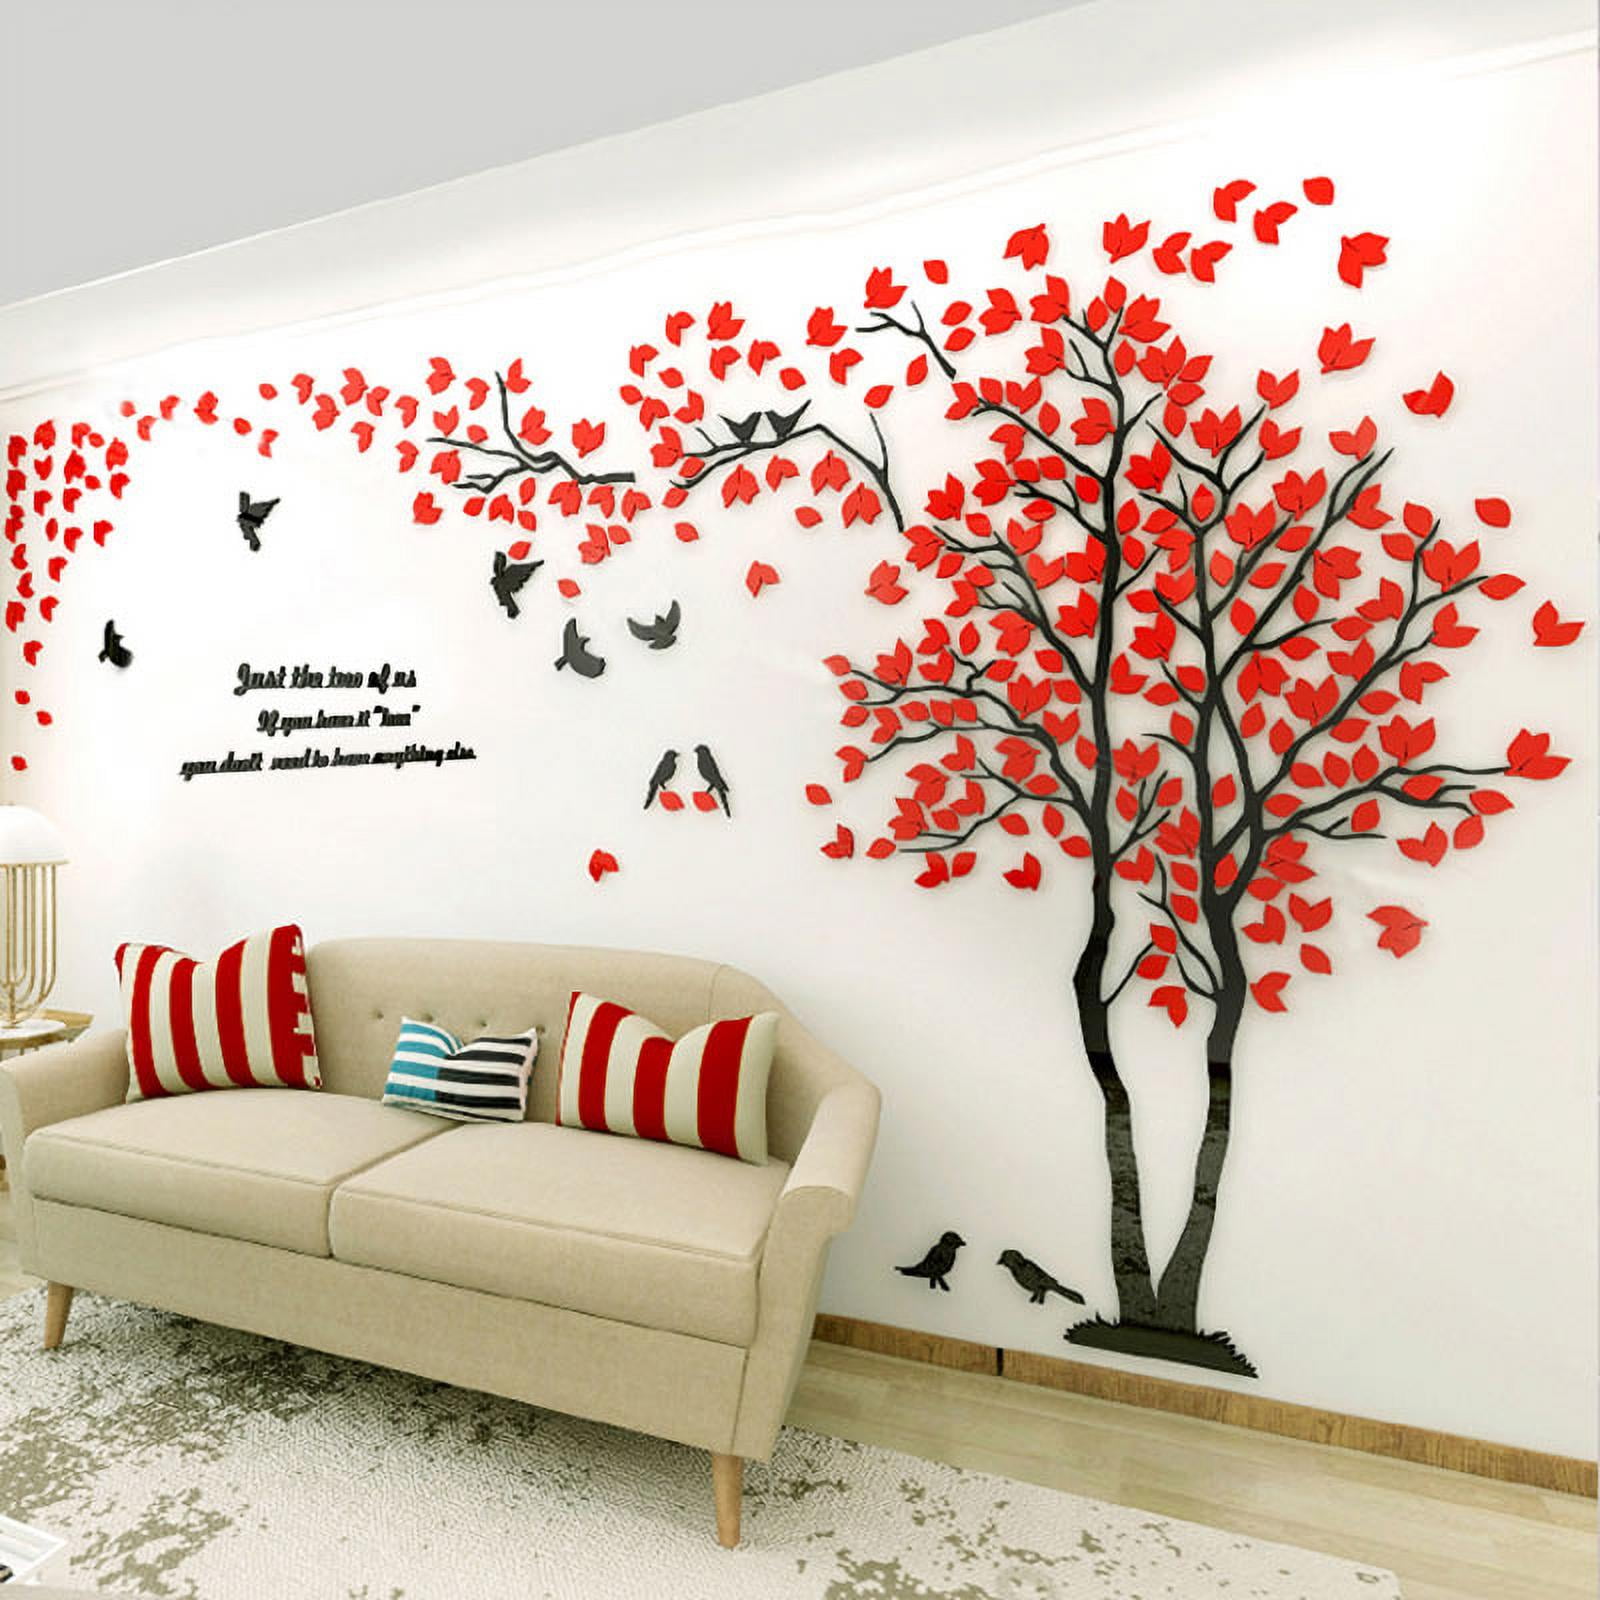 3D Tree Wall Art Wall Stickers Removable Vinyl Decal Mural TV Background  Home Decor New 